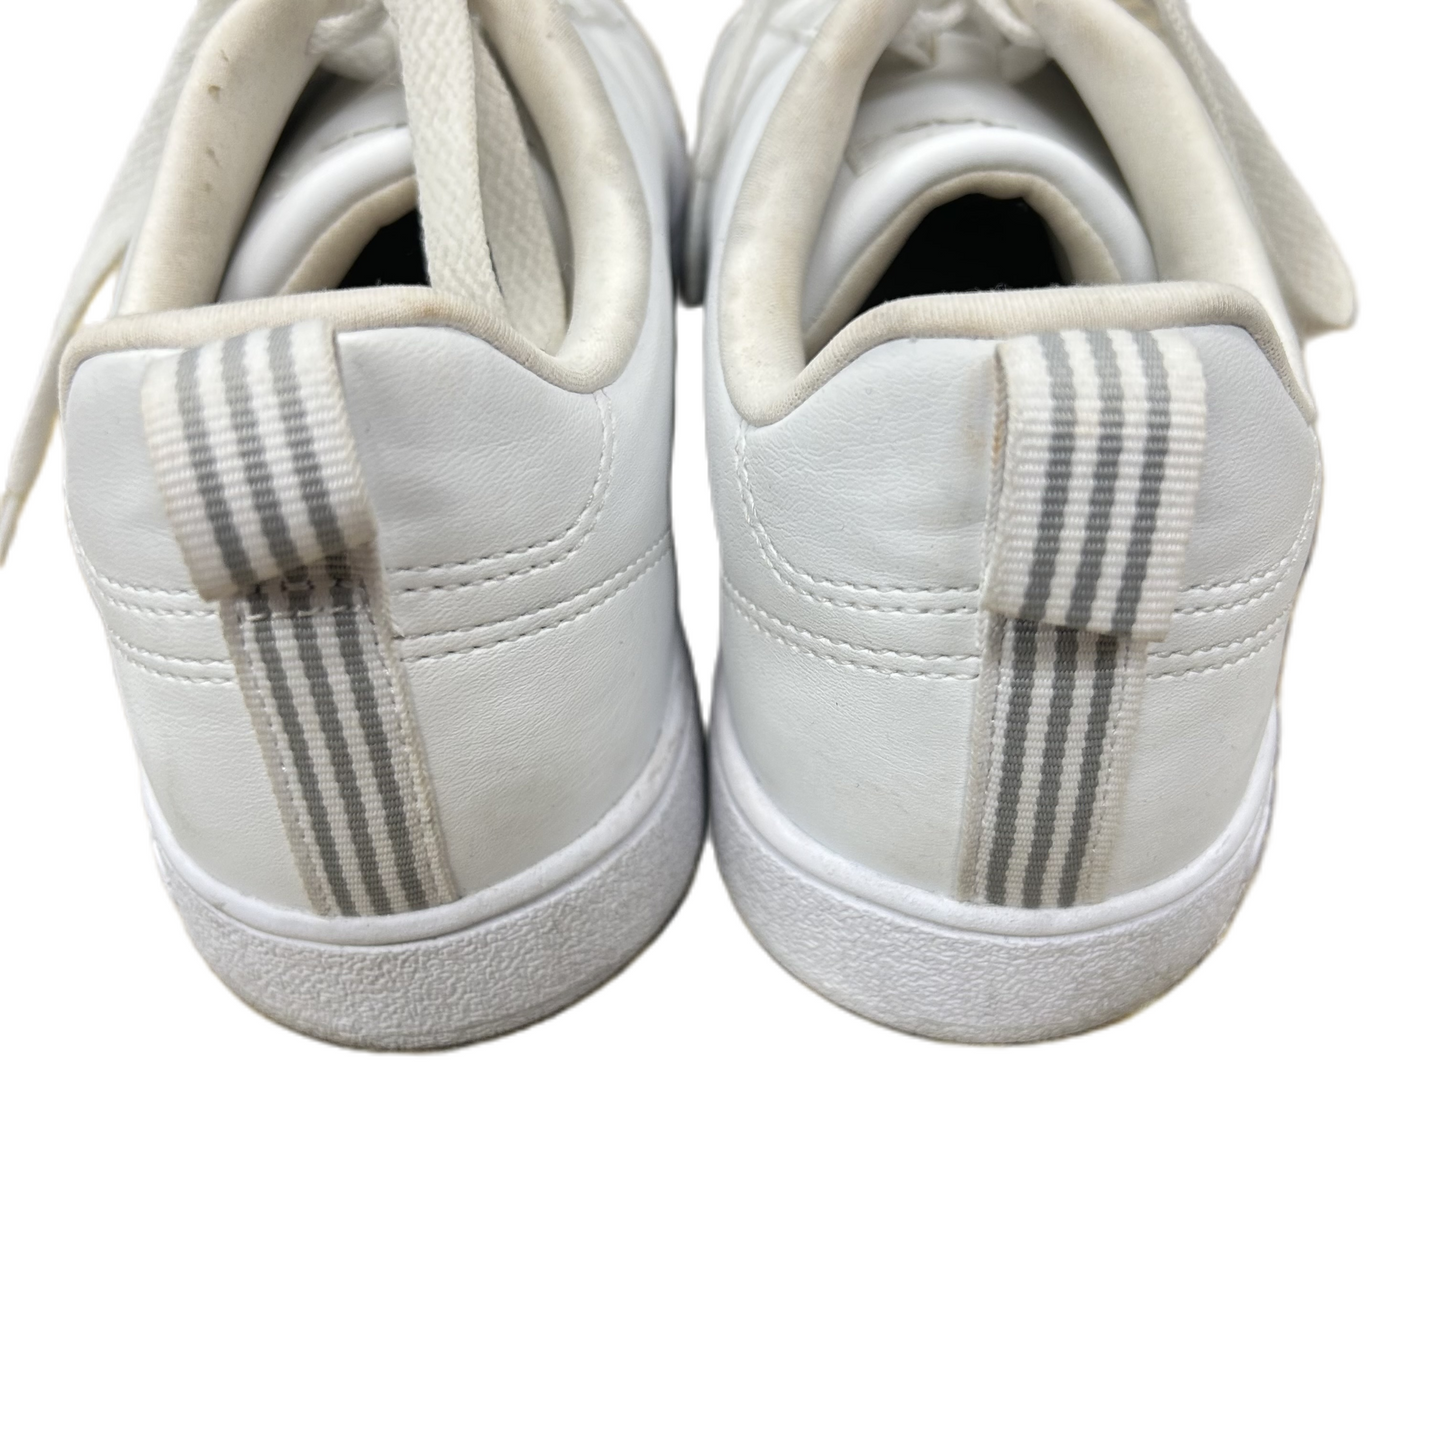 Silver & White Shoes Sneakers By Adidas, Size: 9.5